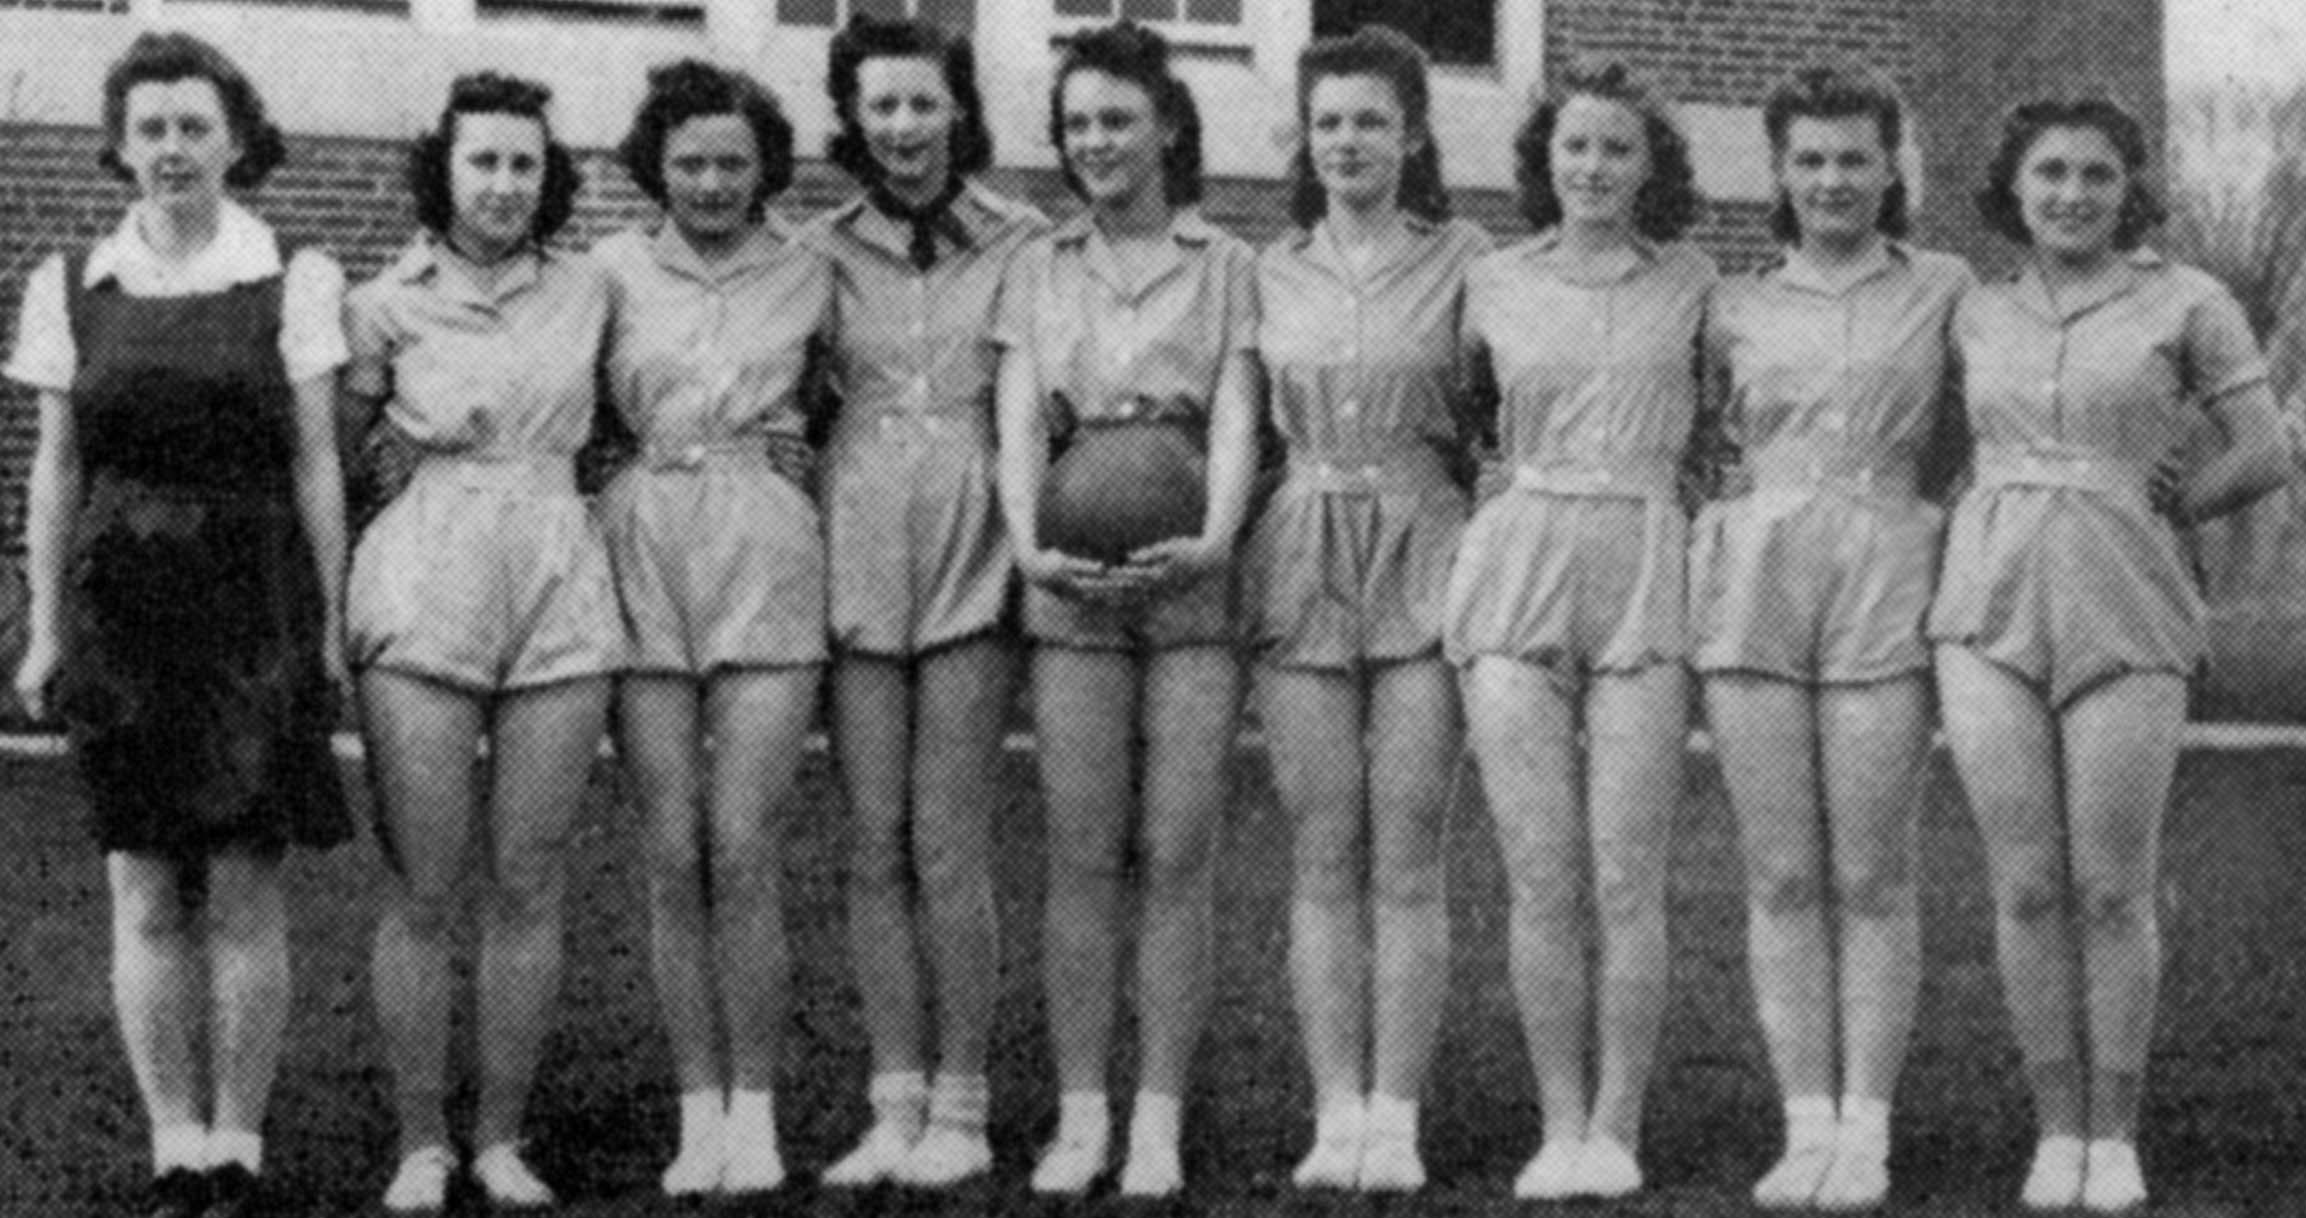 (Click to magnify) While the 'Girls' Basketball team is shown, there is no explicit caption identifying these team members. In the yearbook, it gives the following:  SENIOR GIRLS' TEAM: FORWARDS: Marion Yule, Aileen Feir, Doris Pollock, Marion Mustard (ca